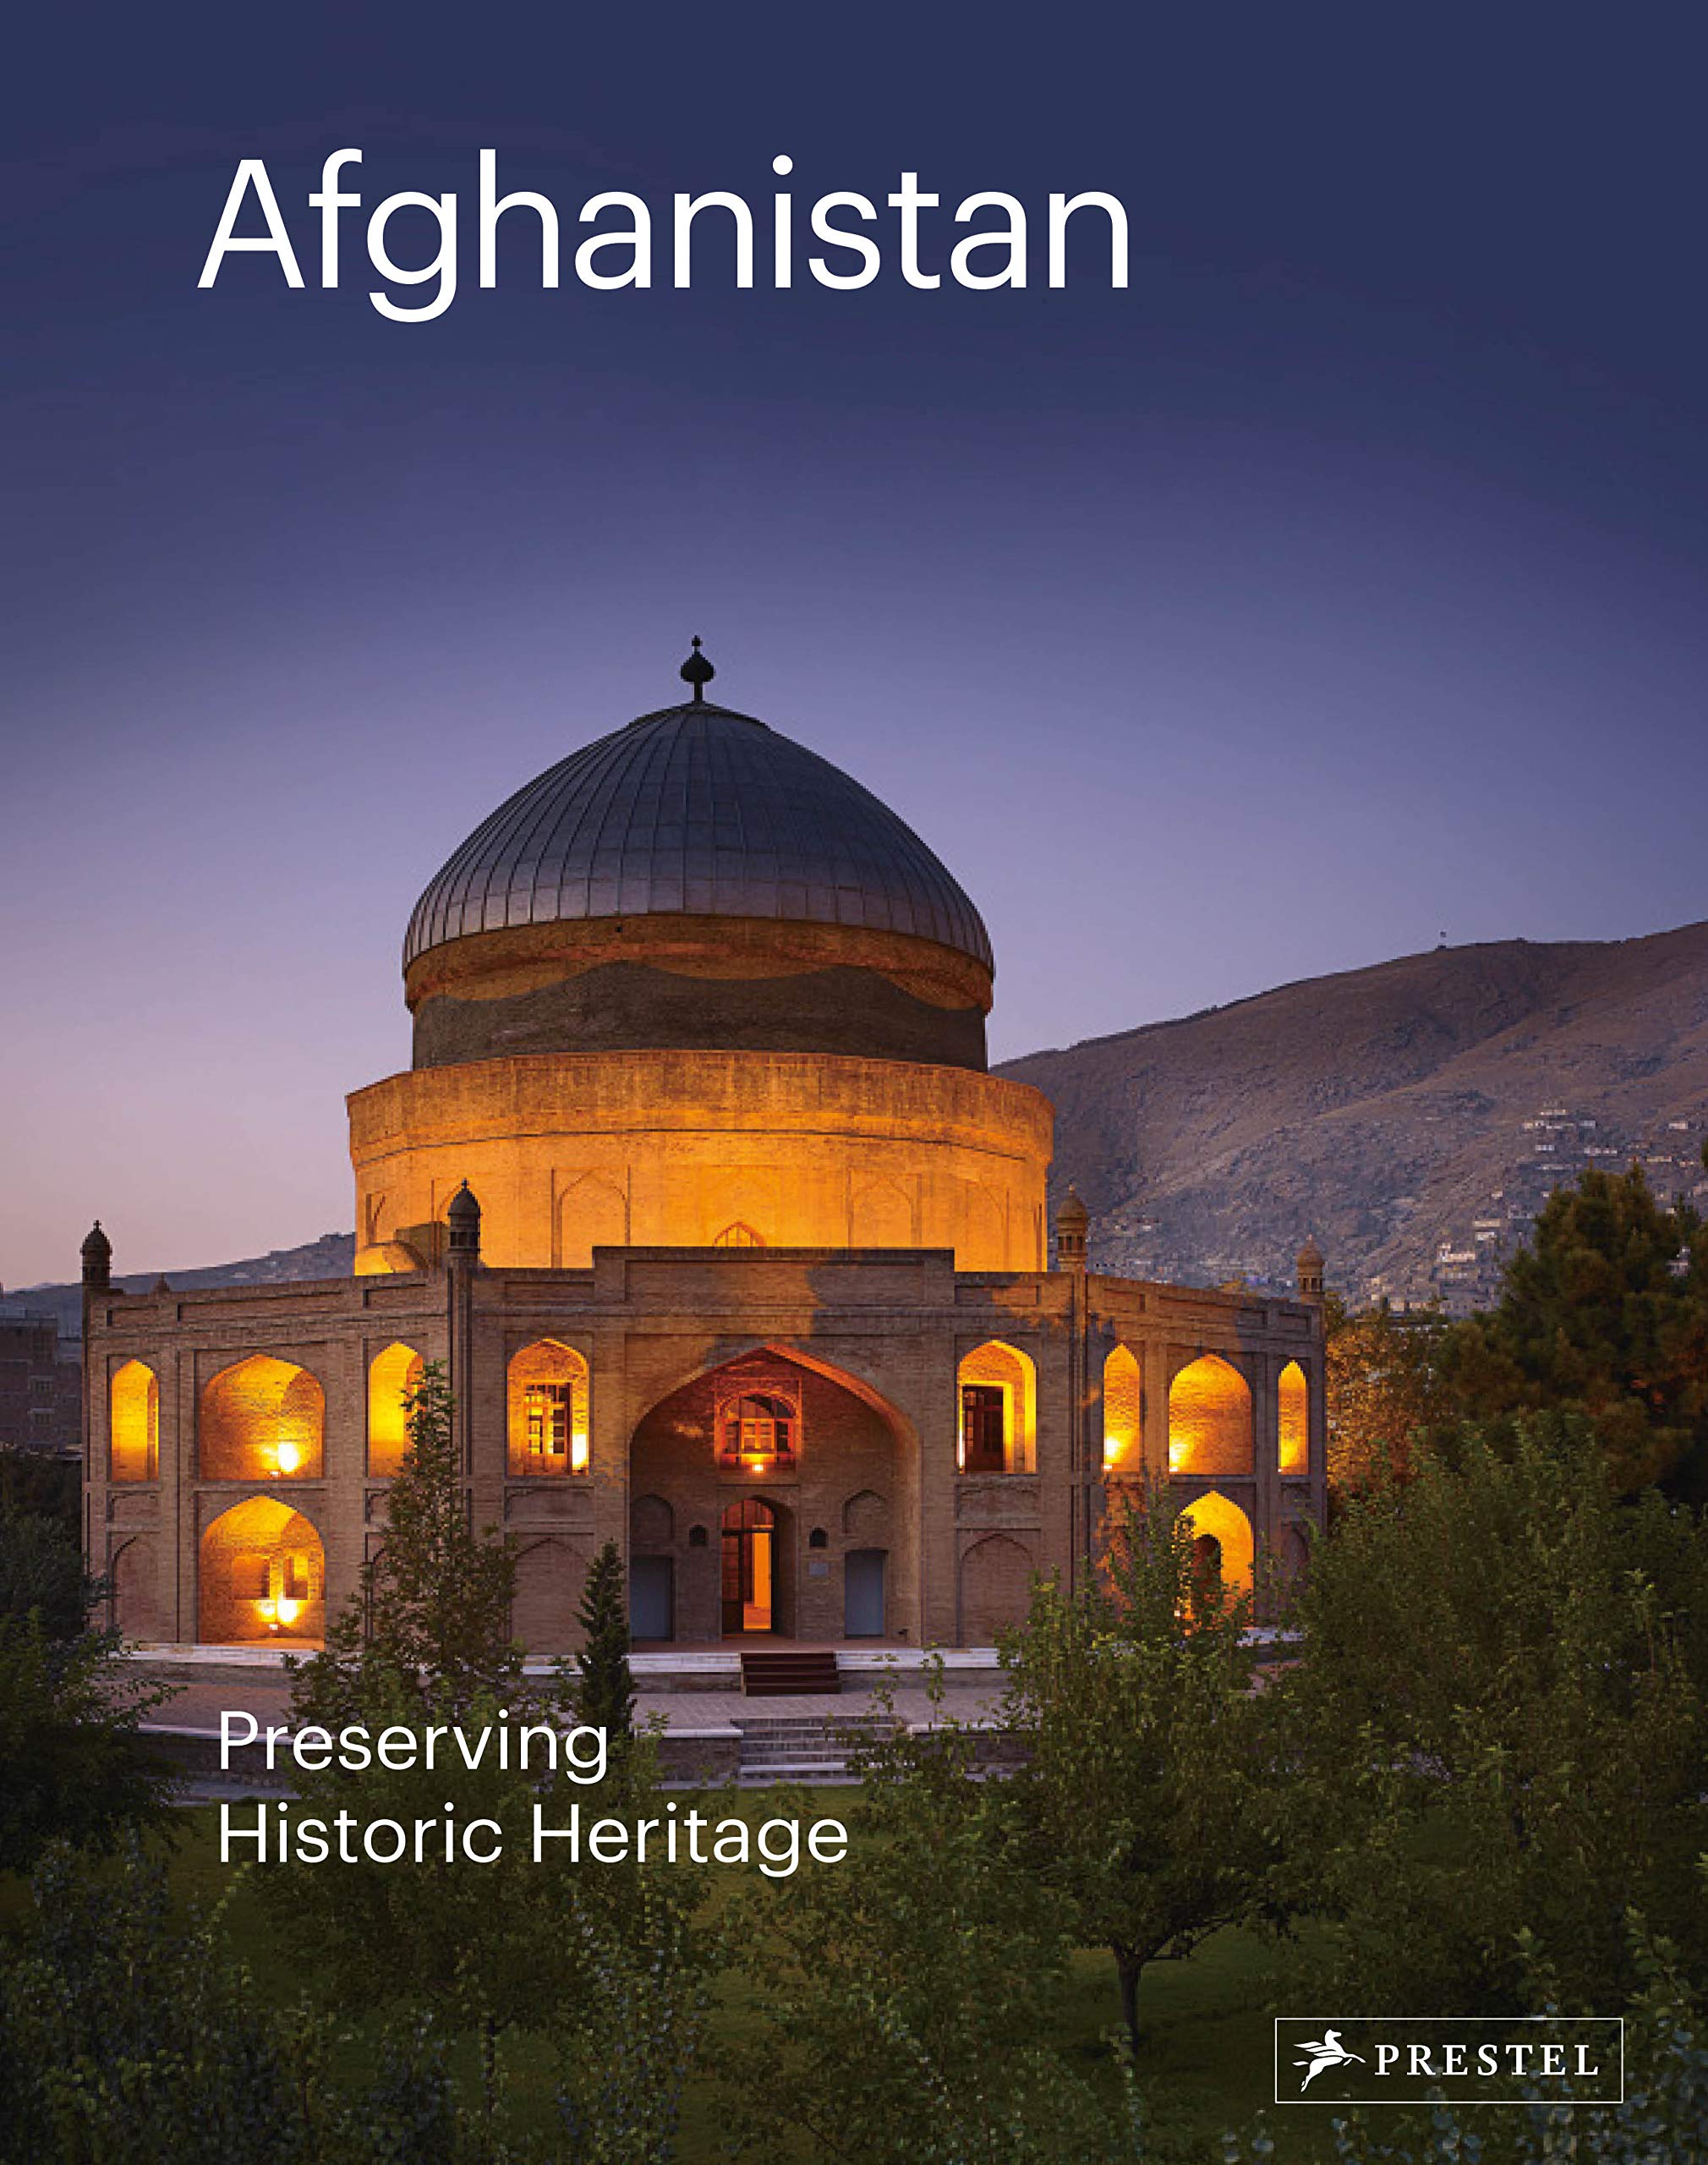 Citadel of Herat Restoration - <p>At the crossroads of the ancient world between the Steppe of Central Asia and the Indian subcontinent, Afghanistan has been at the centre of a network of cultural exchange and influence propagated by successive civilizations and empires for over four thousand years.&nbsp;</p><p><br></p><p>As Afghanistan recovers from decades of destruction, this book celebrates many of the Aga Khan Trust for Culture’s projects to restore monuments and other sites to their former glory. For decades, the Aga Khan Trust for Culture has been working to revitalize the social, cultural, and economic strength of communities in the Muslim world through its Historic Cities Programme. This book documents more than 100 such efforts that have been carried out in Afghanistan since 2002. Each project is illustrated with specially commissioned photographs and detailed descriptions. A powerful testament to the Trust's commitment to Islamic culture, this book documents the organisation’s ongoing work to celebrate, restore, and maintain Afghanistan’s cultural presence in the modern world.</p>